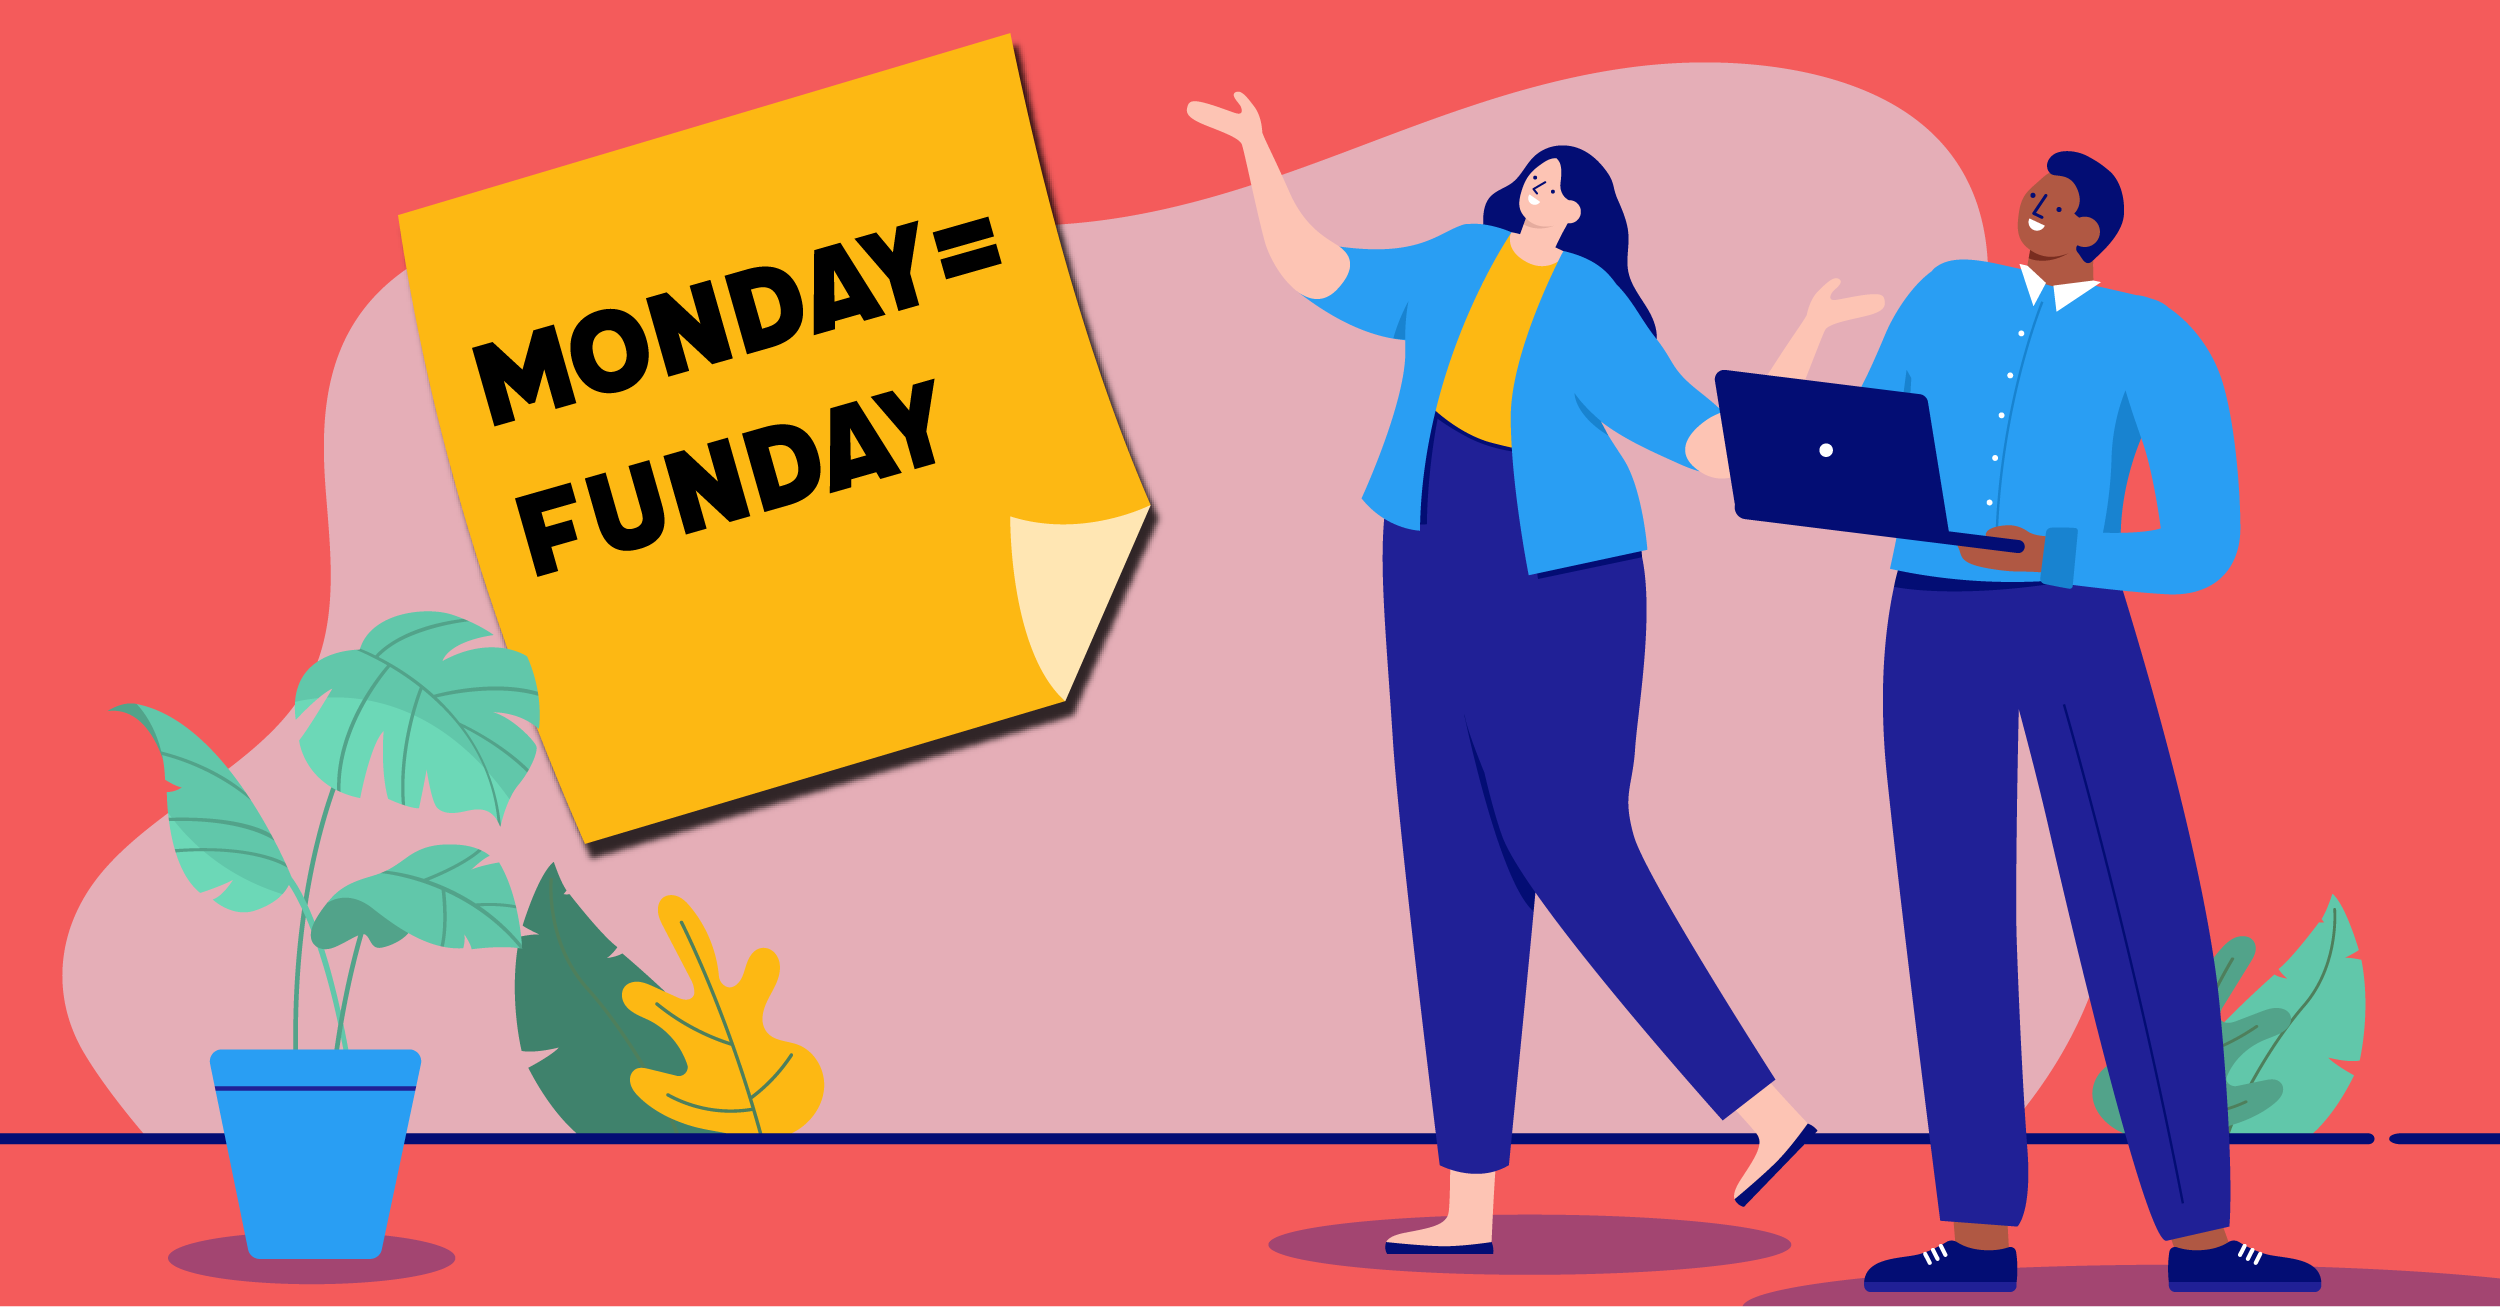 Woman gestures happily to a Monday=Funday sticky note, while a man with a laptop stands next to her